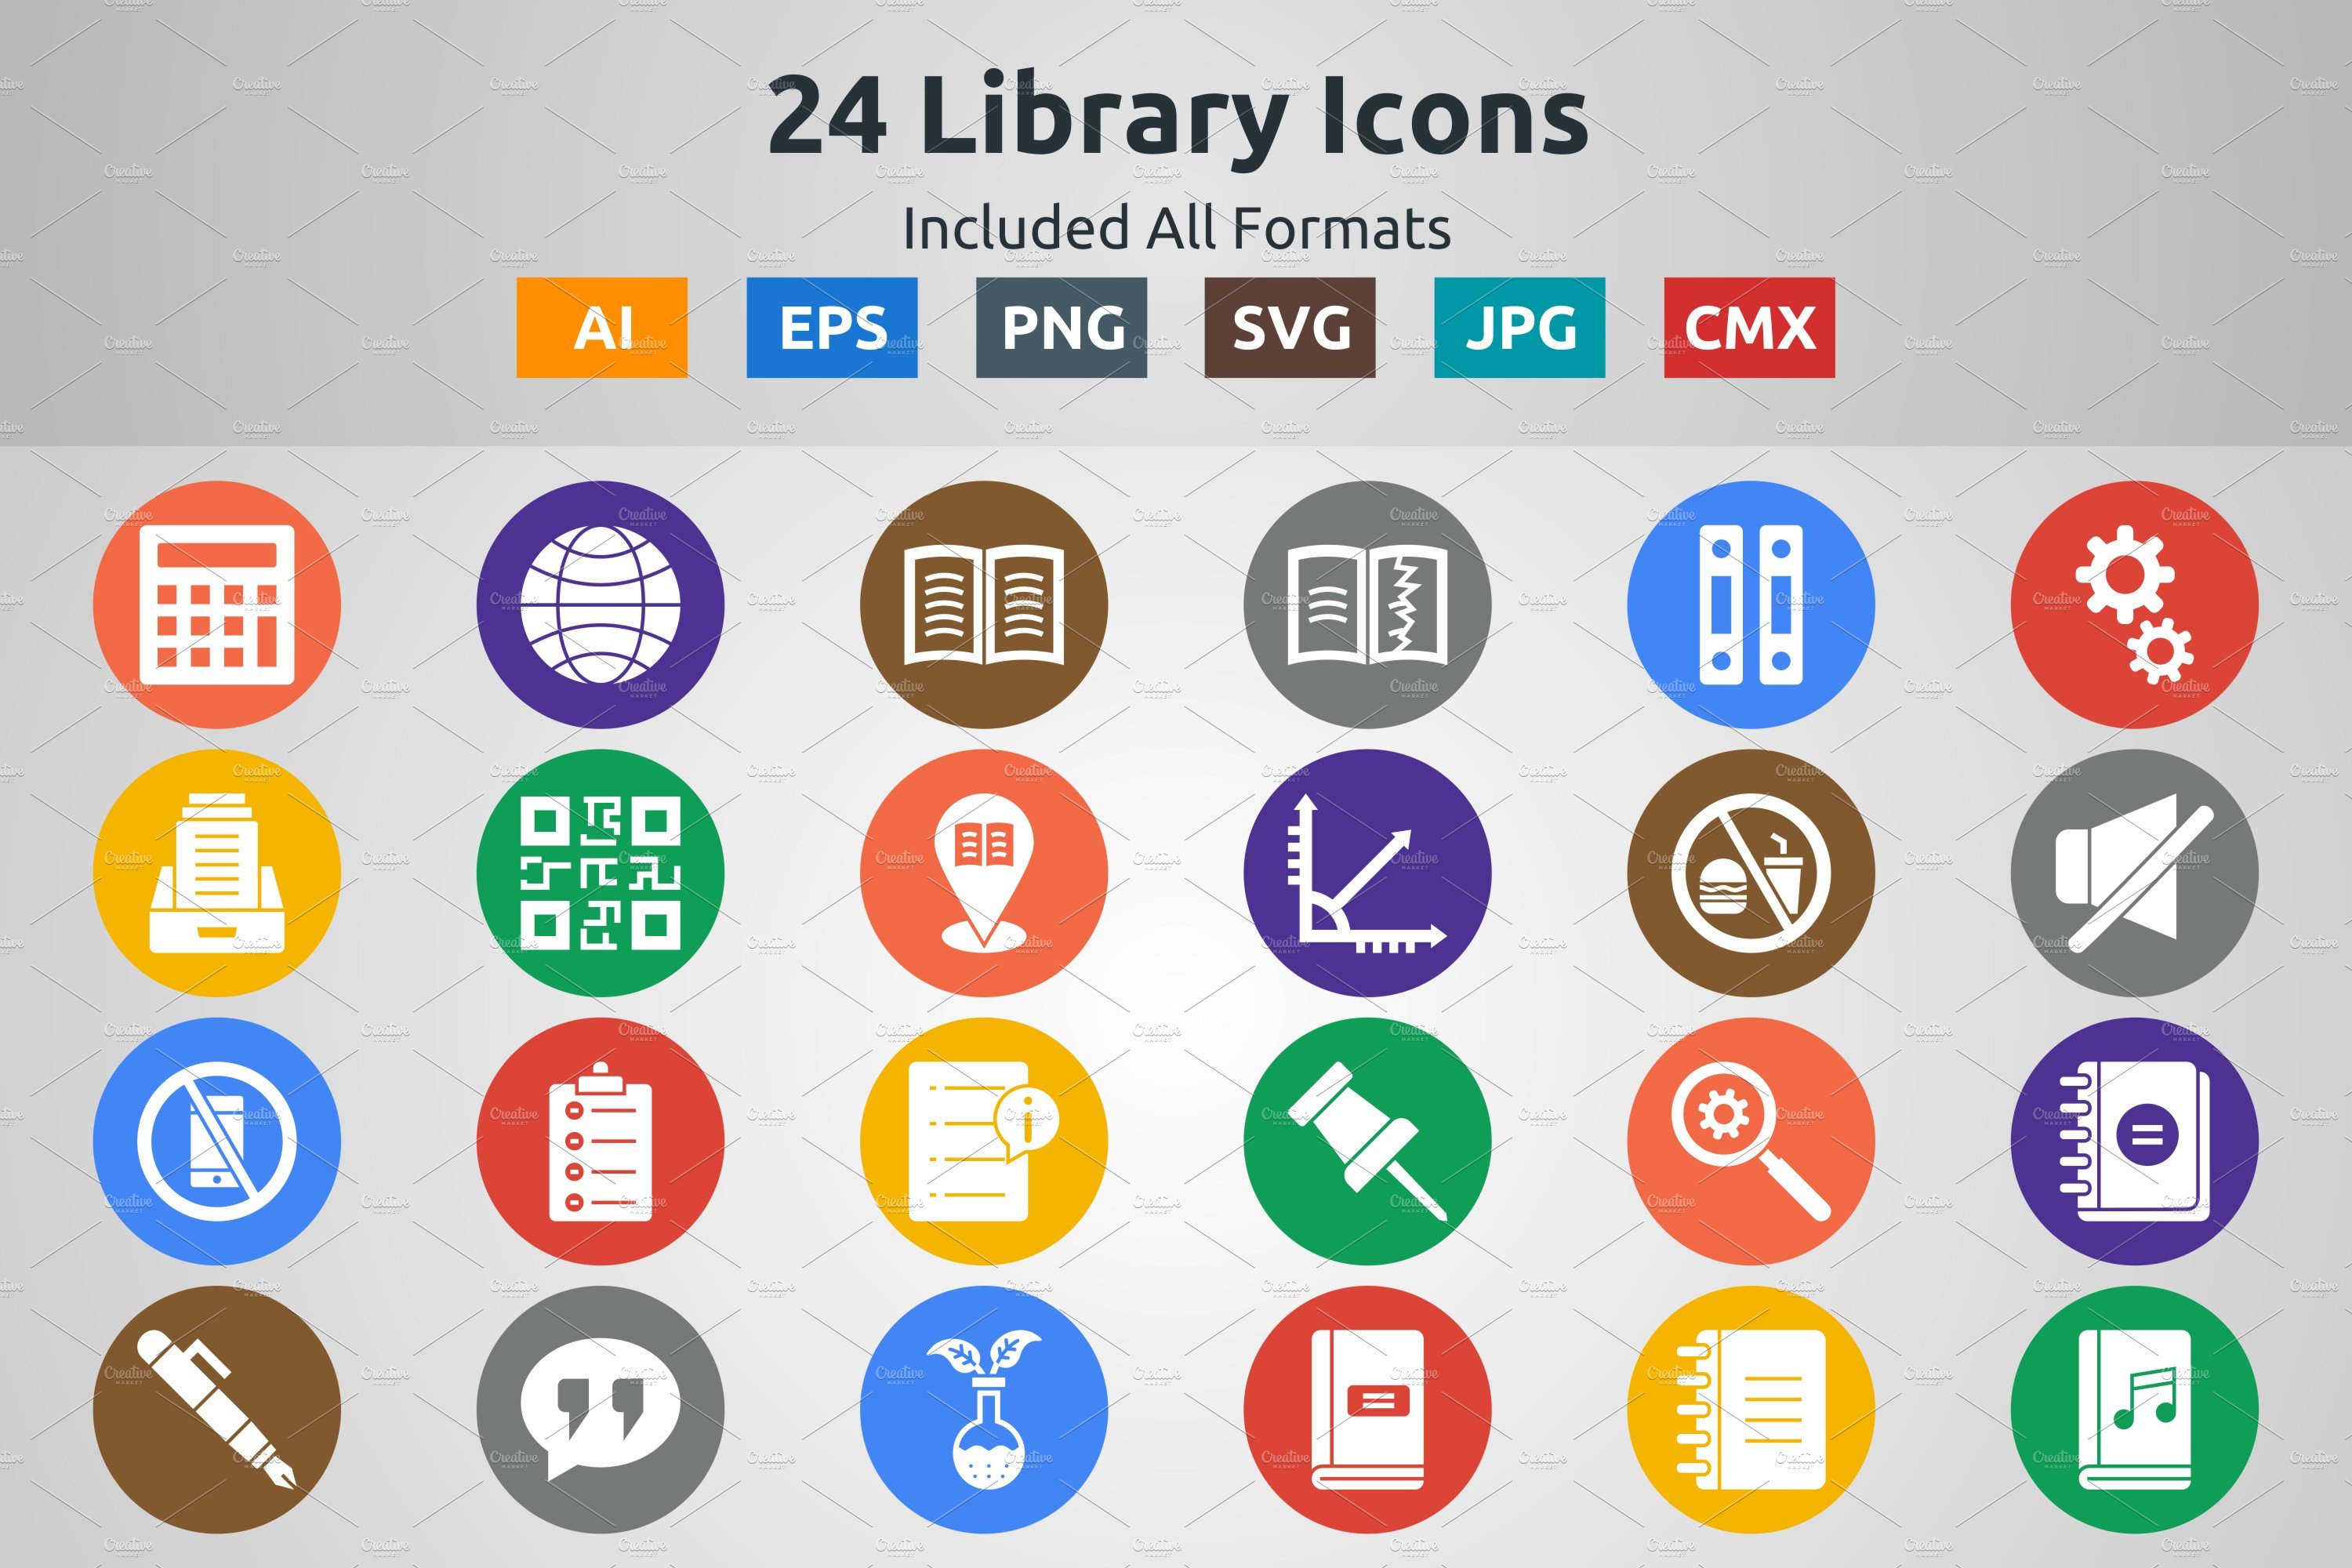 Glyph Icon of Library cover image.